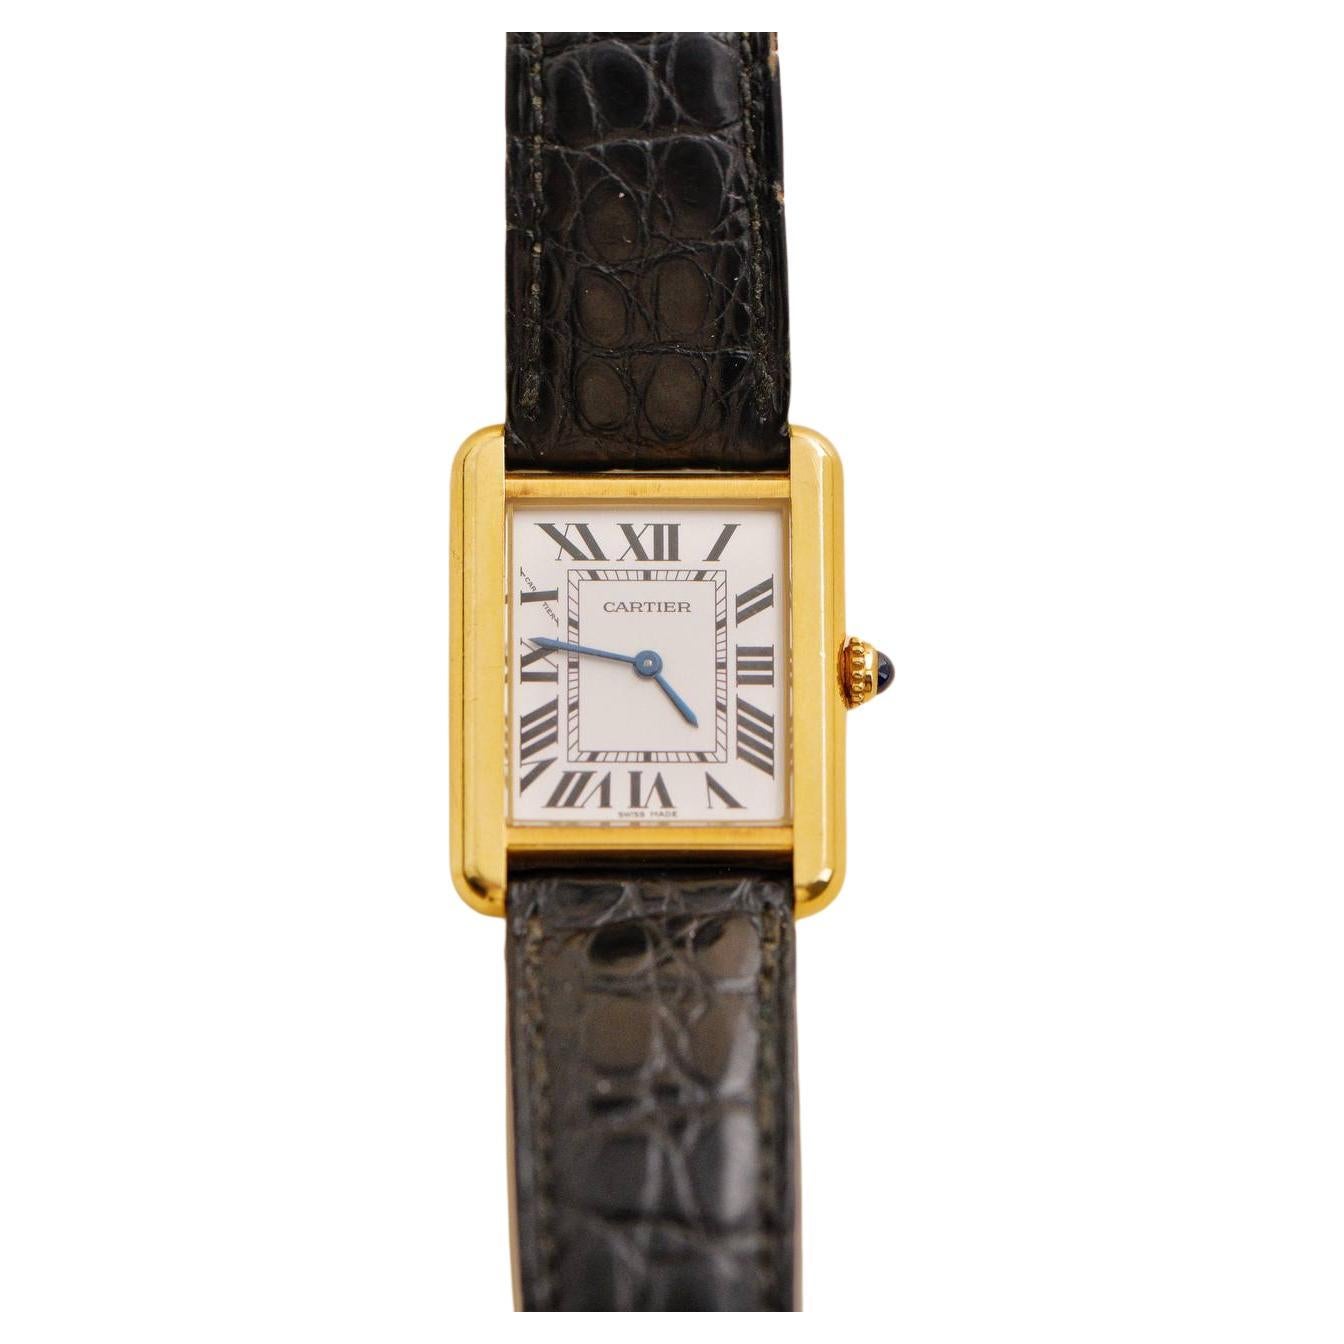 Which Cartier Tank is the original?